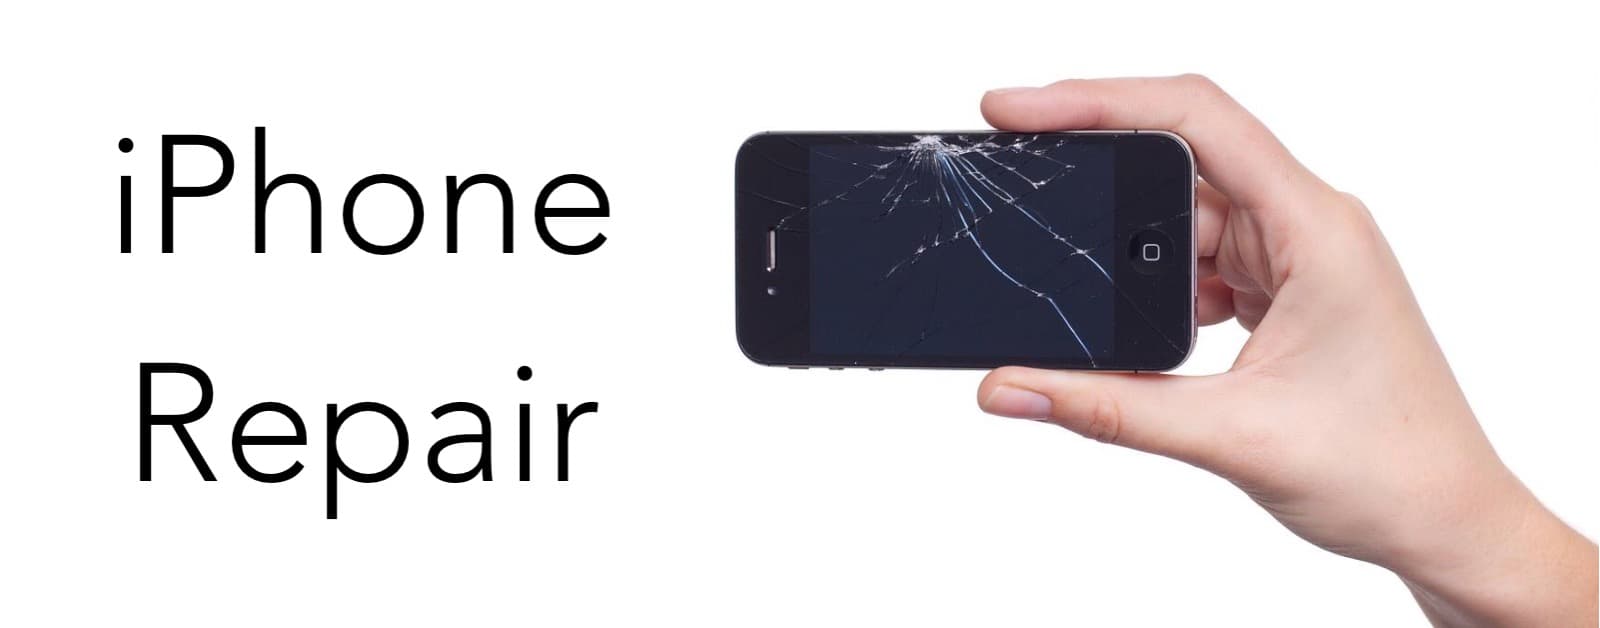 iPhone Screen Repairs By Third Parties Now Get Some Warranty Coverage